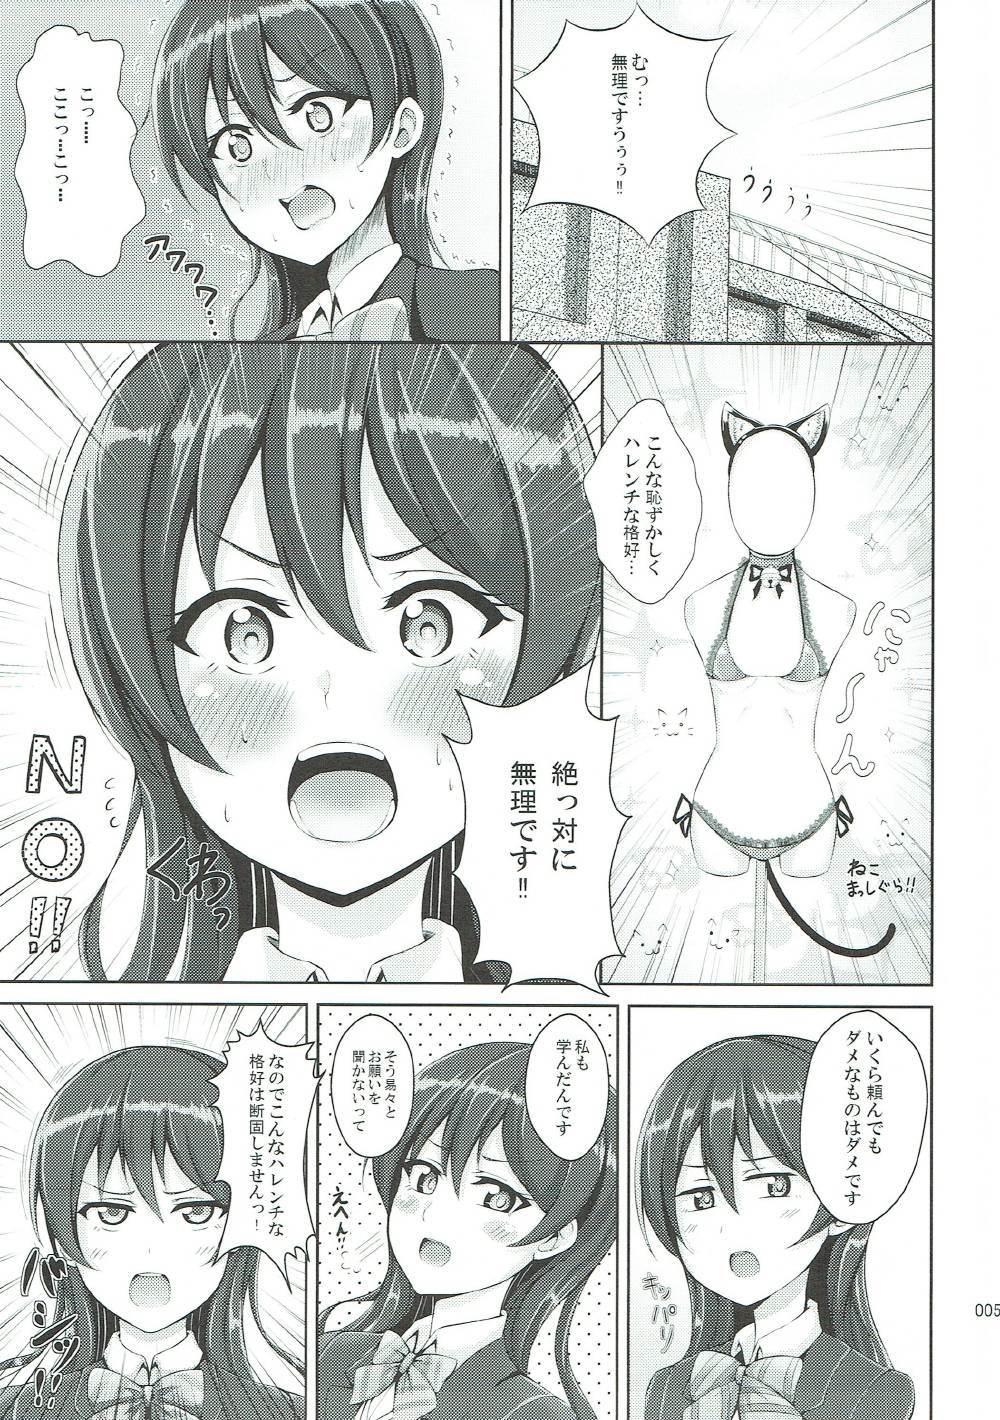 Breast Umi-chan to Nyannyan - Love live Soft - Page 3